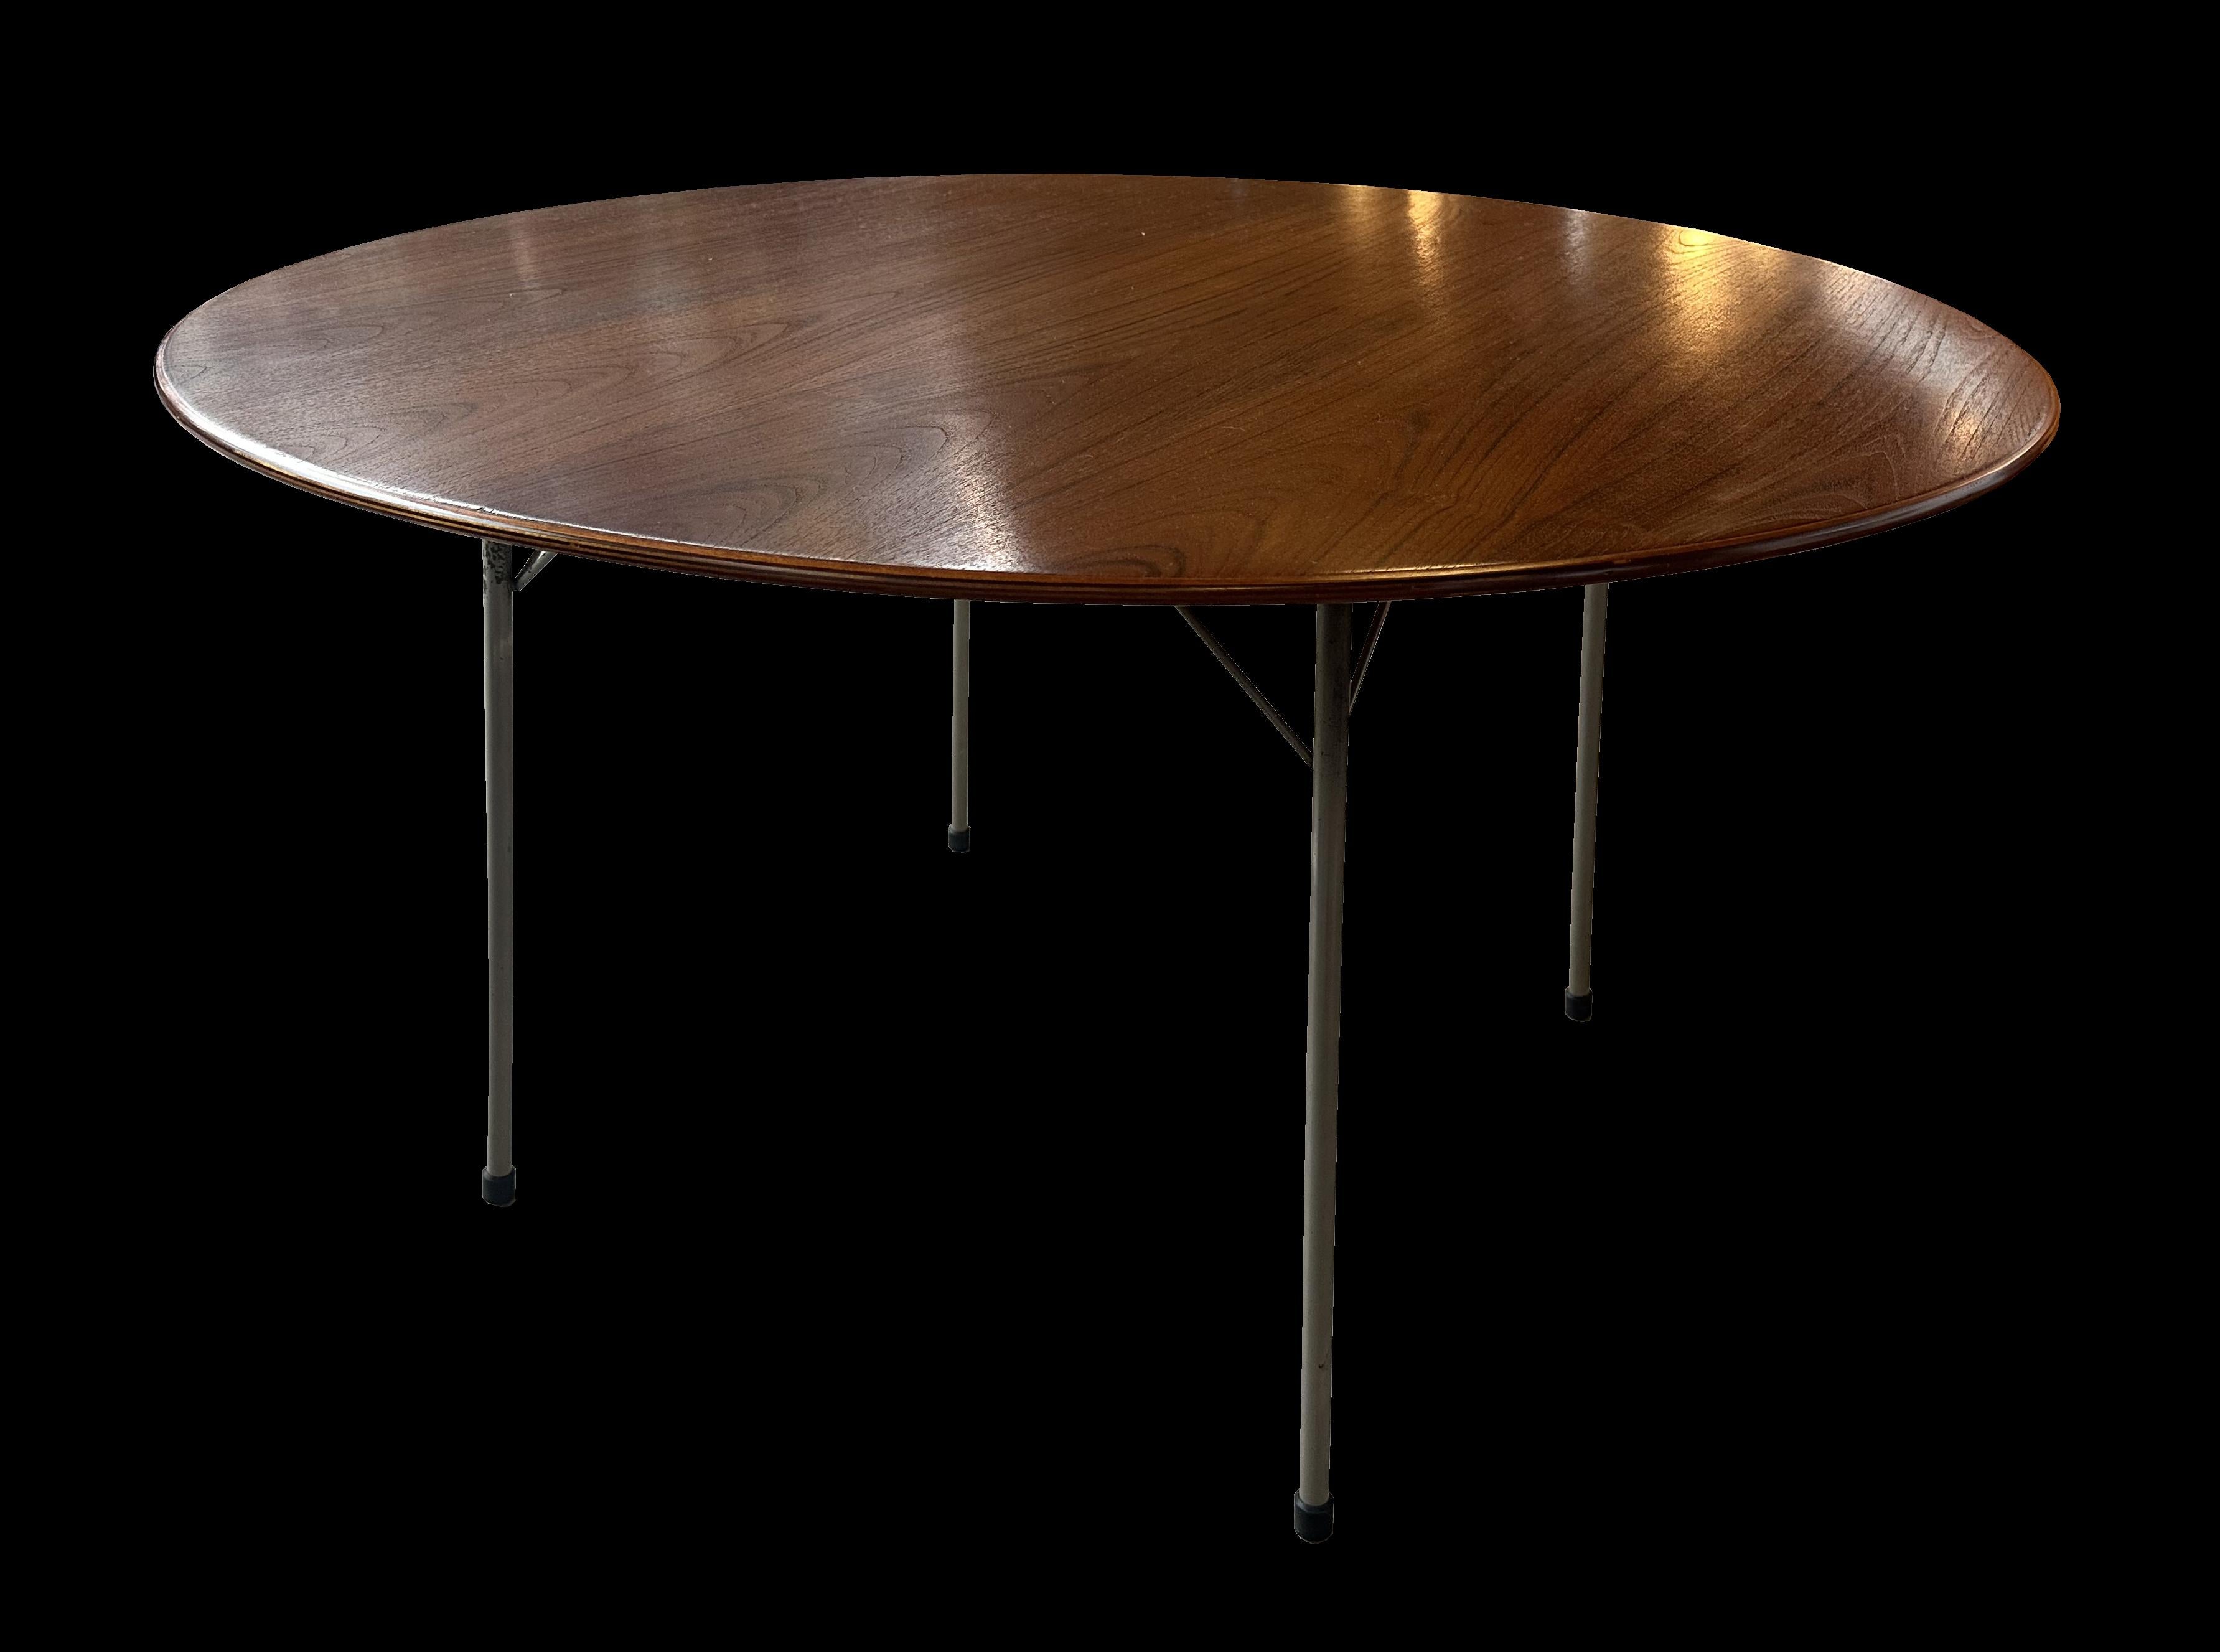 This is an early original version, designed by Arne Jacobsen and Made by Fritz Hansen, and retaining it;s original Ivorine Retailers label from Heal's of Tottenham Court Road London.